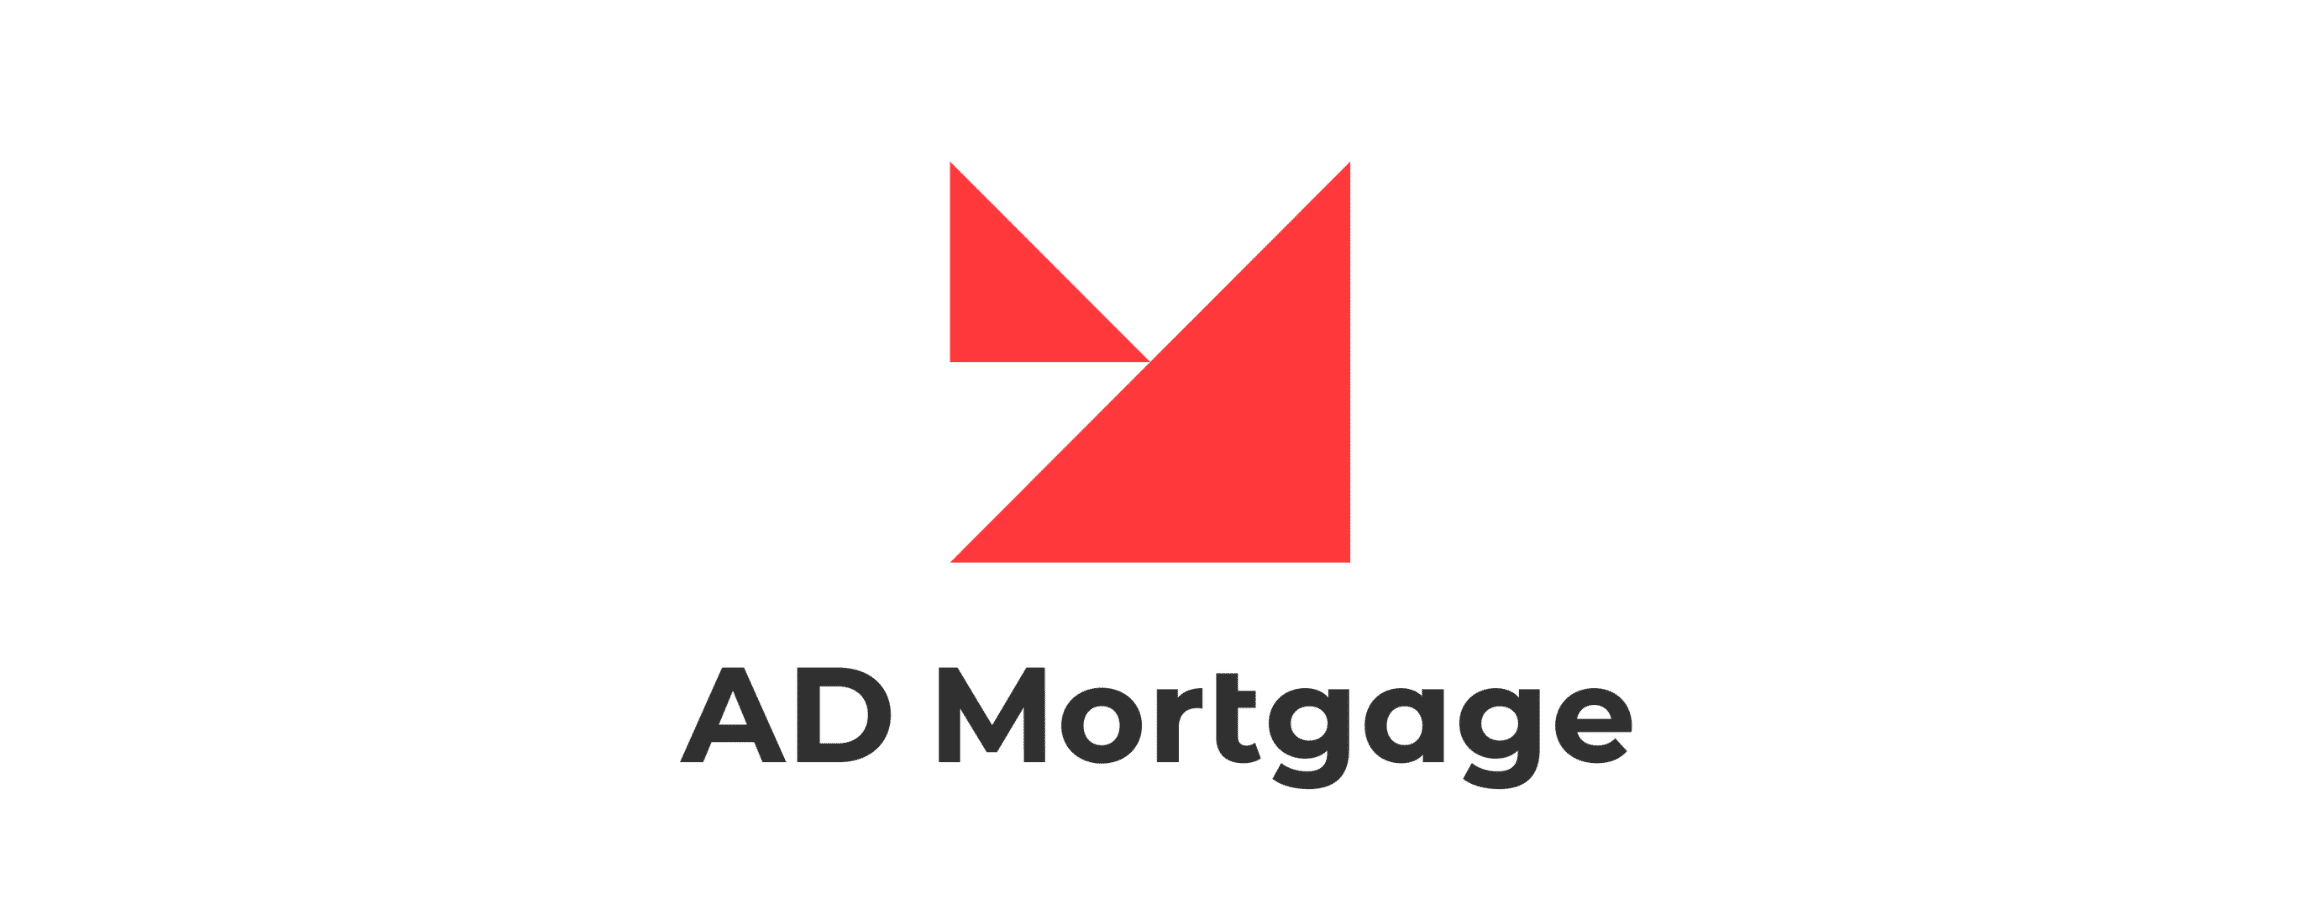 A&D Mortgage